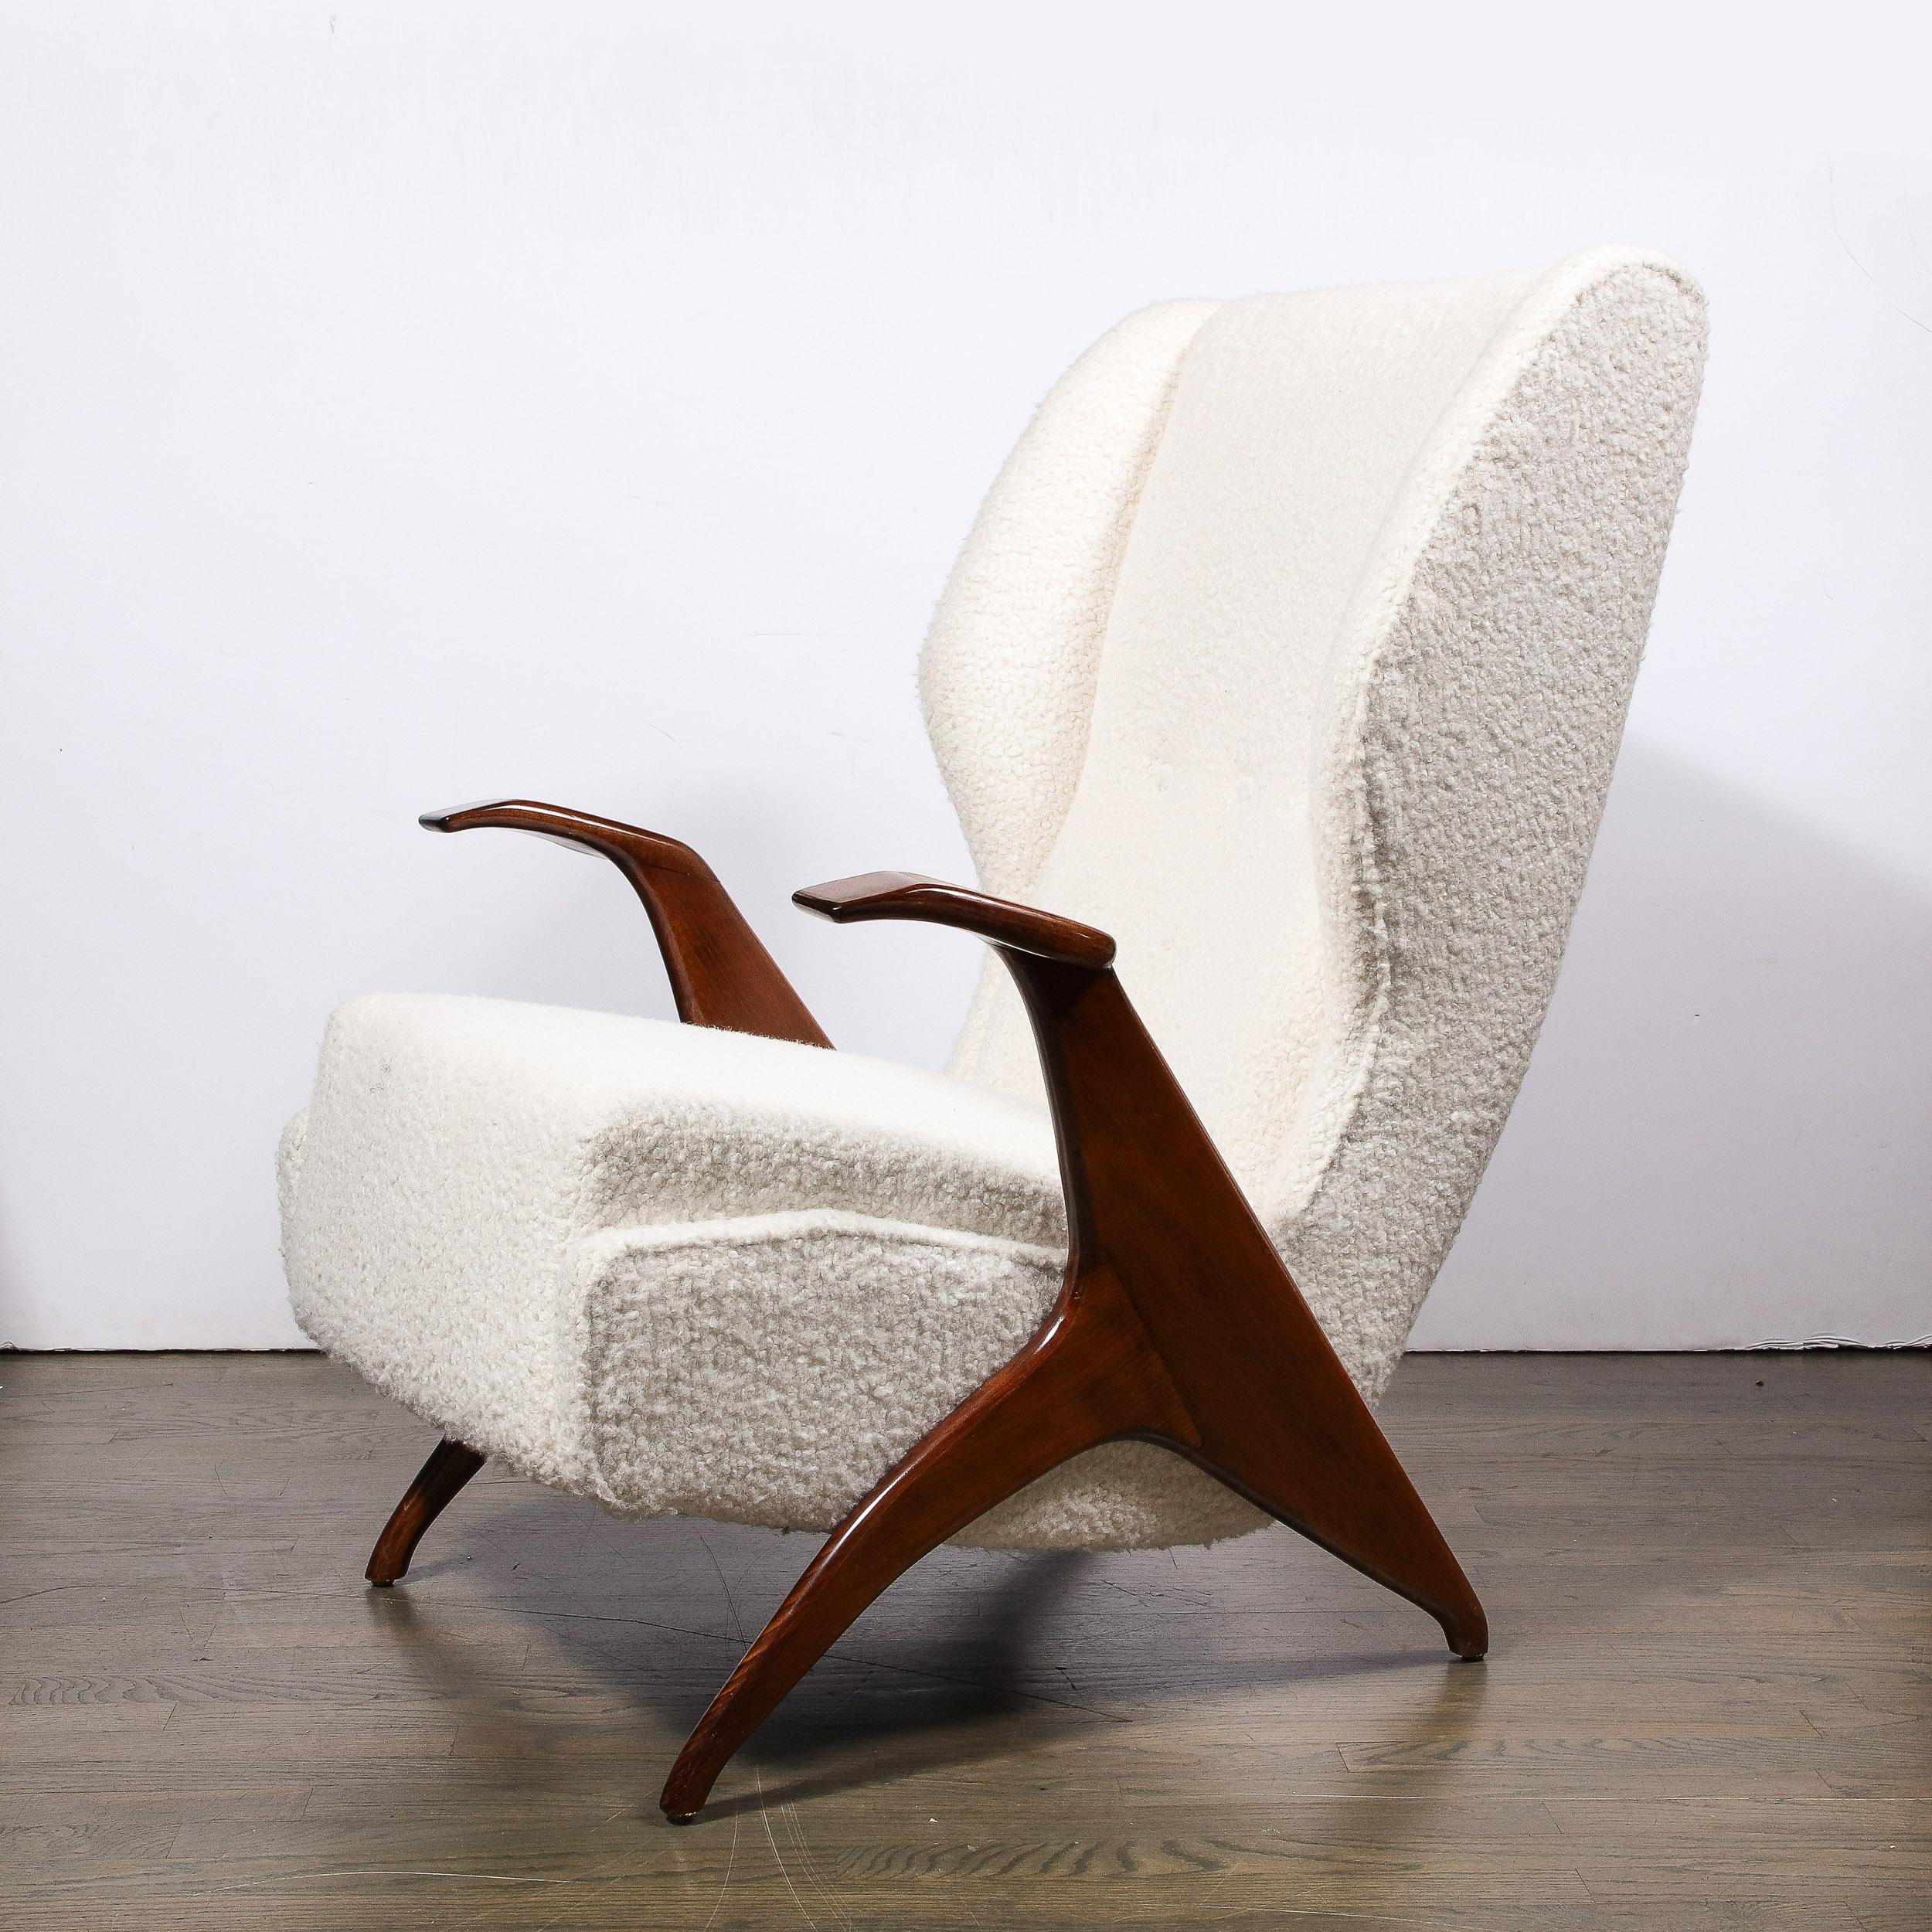 Mid-20th Century Mid-Century Modernist Sculptural Walnut Arm Chairs in Holly Hunt Boucle Fabric For Sale